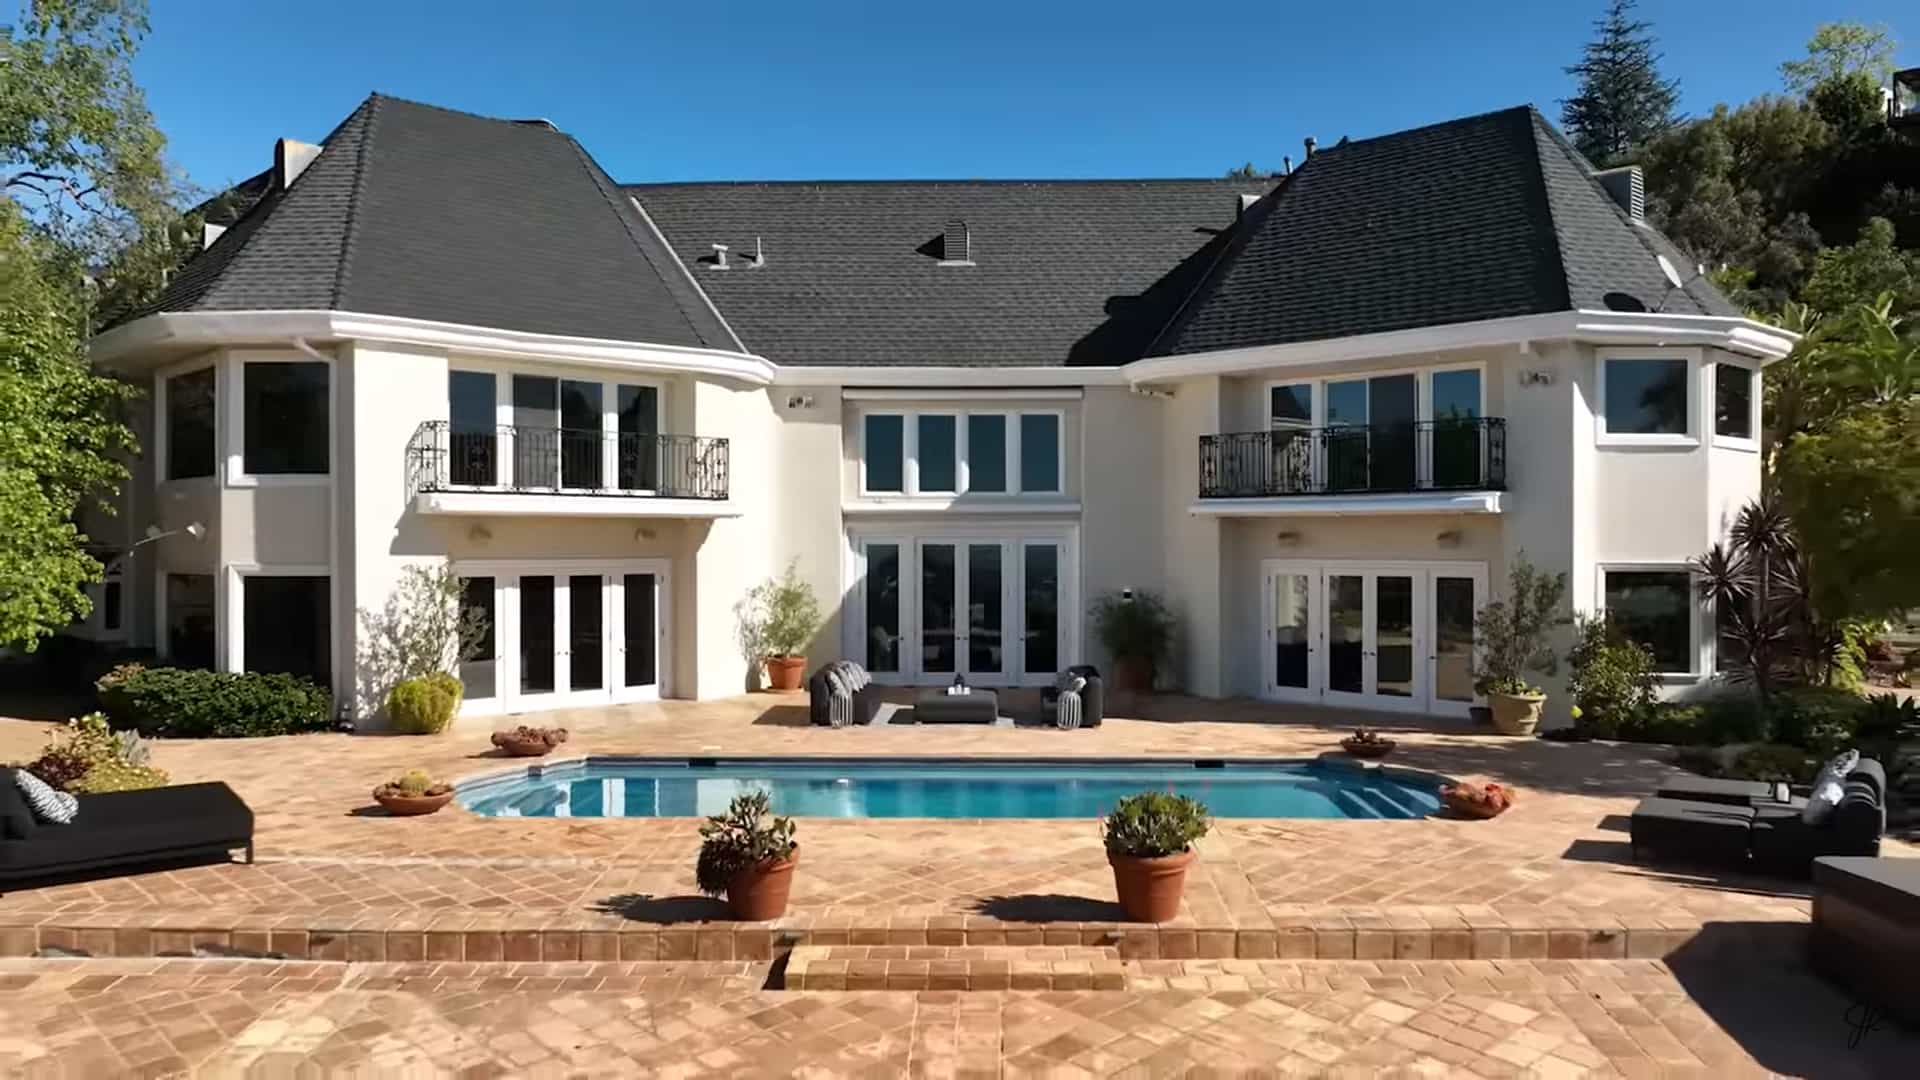 Heather Dubrow’s house before renovation